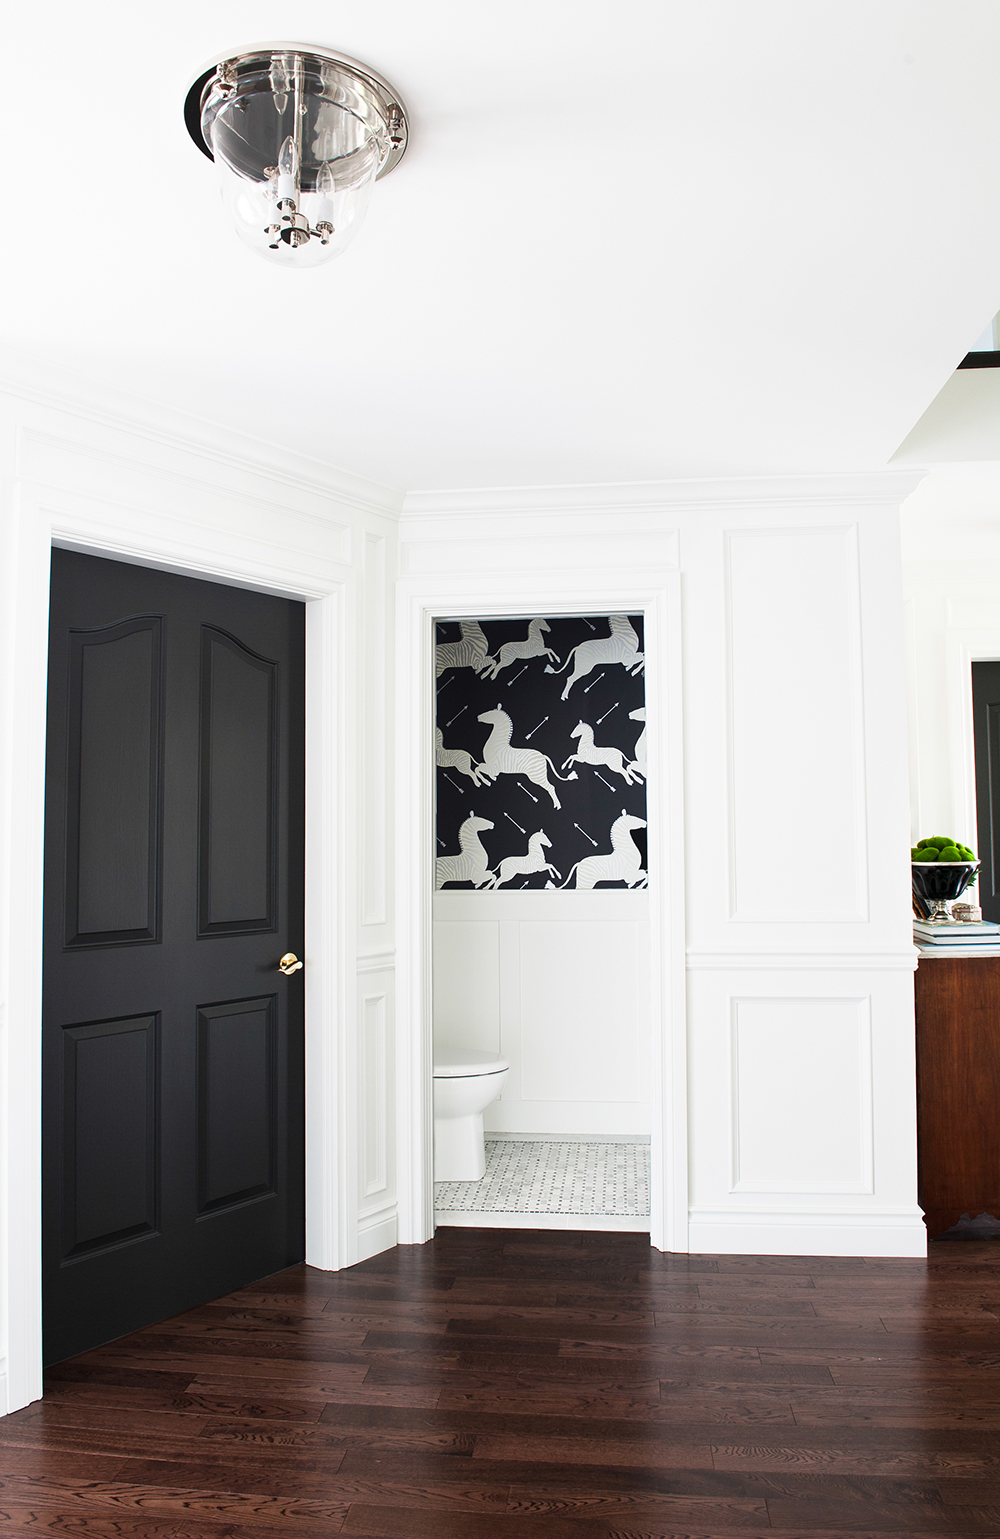 A bold black powder room with dramatic wallpaper.